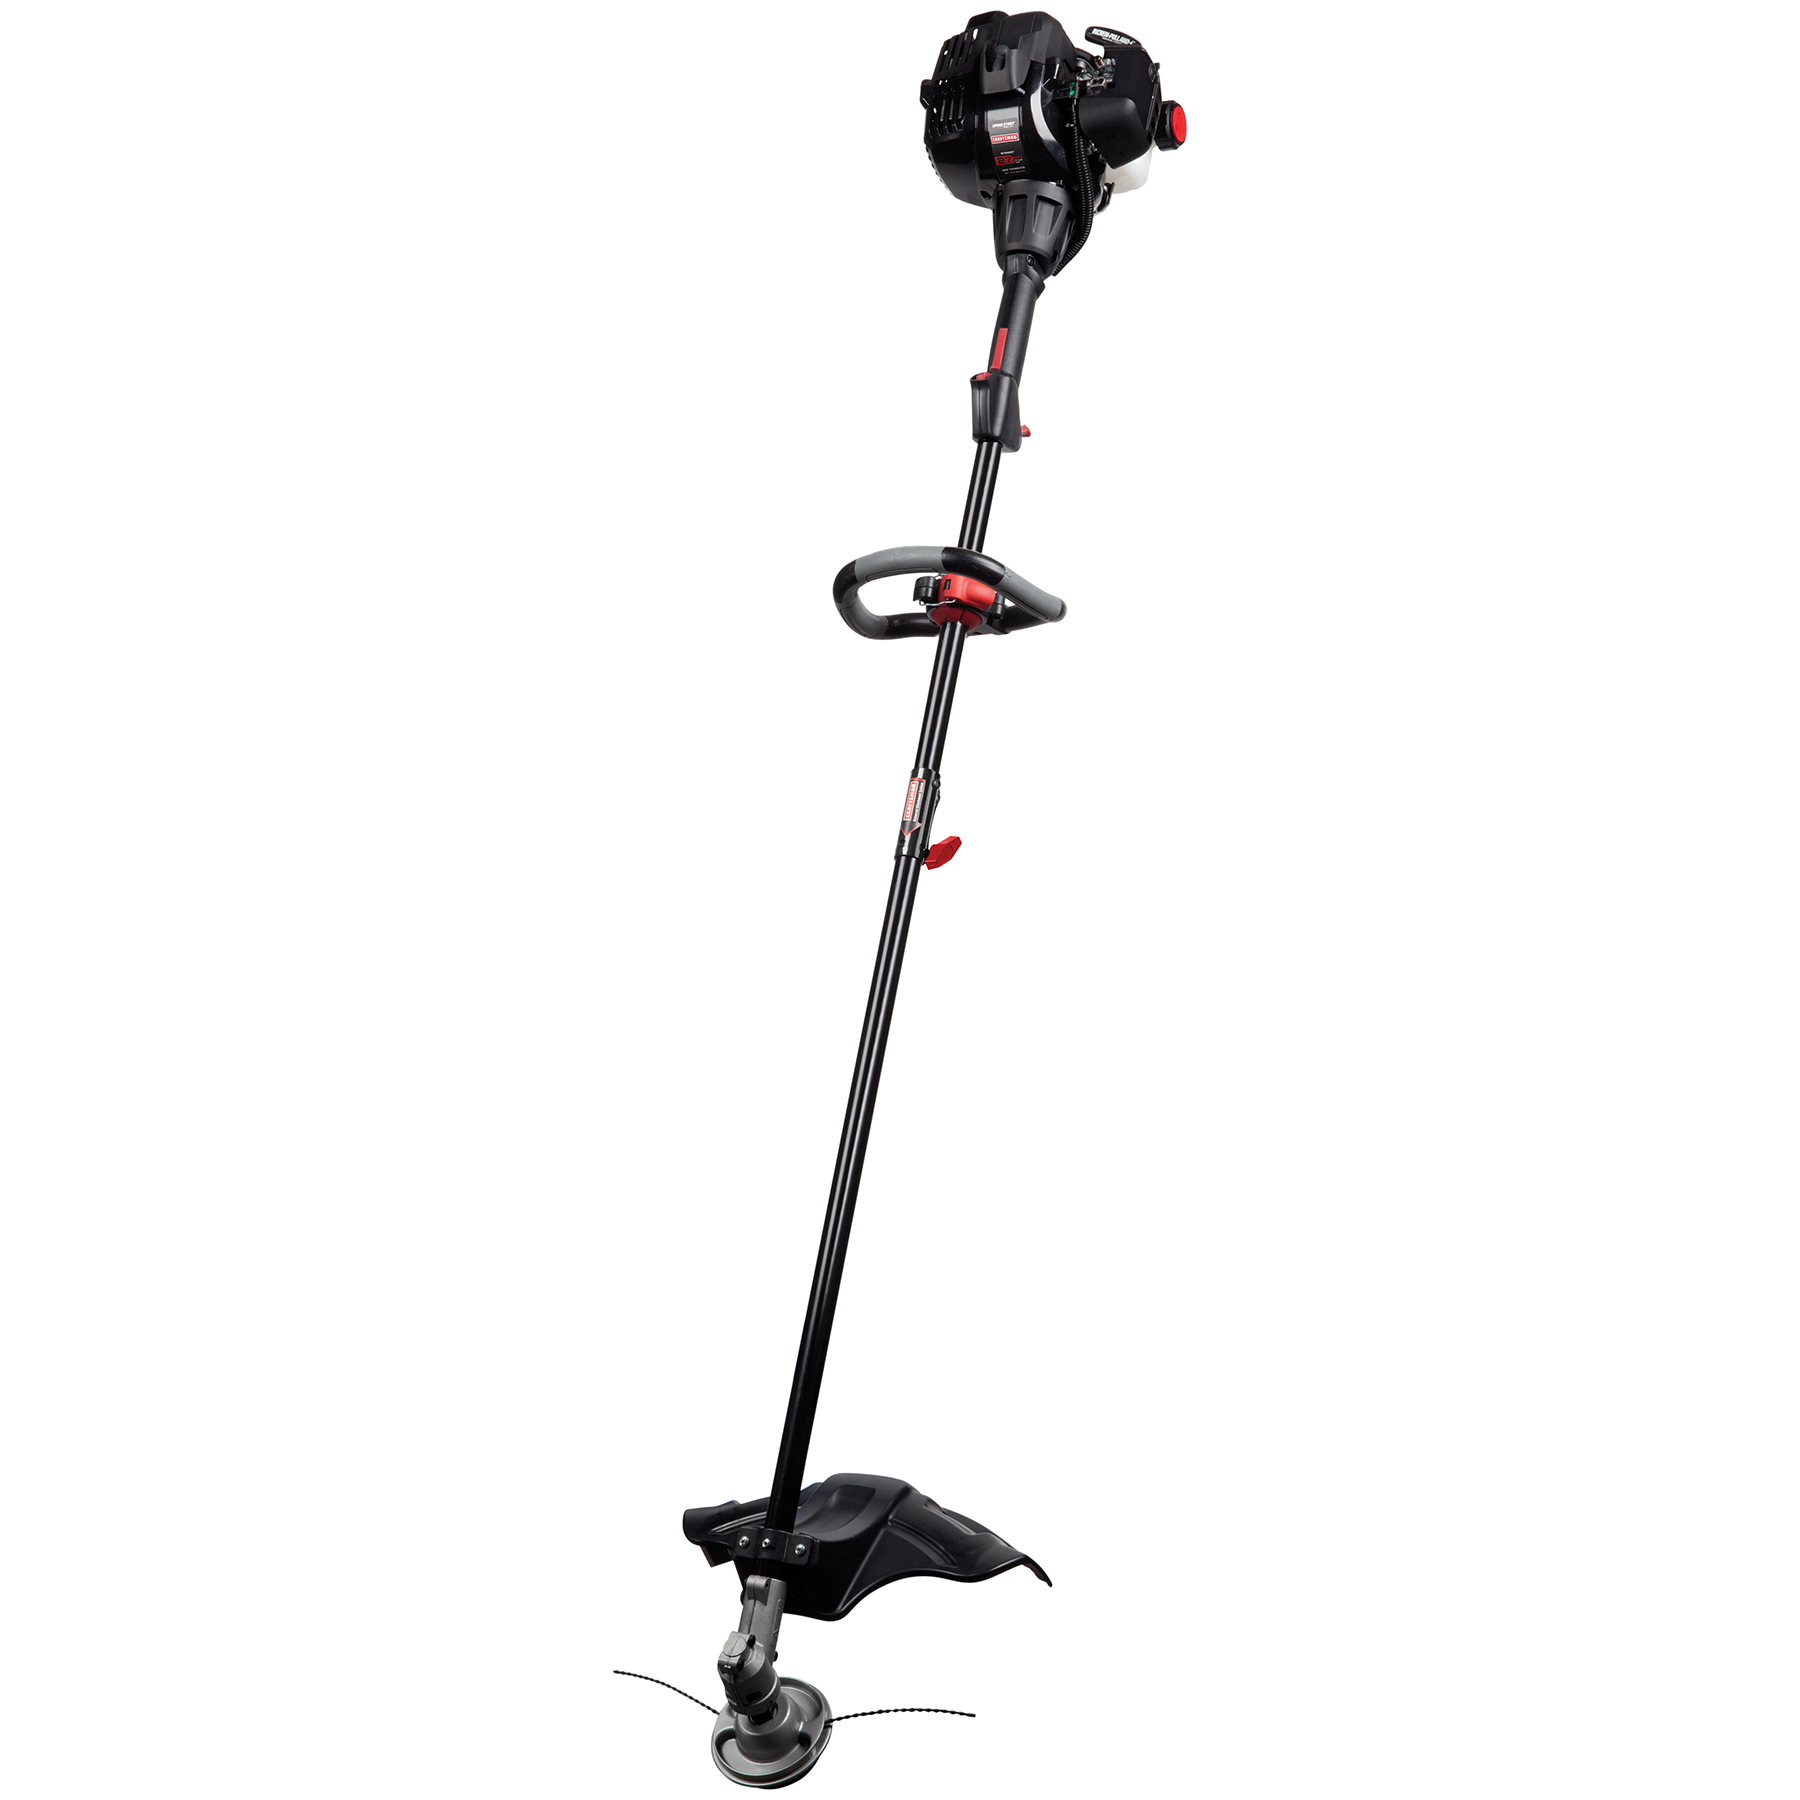 Craftsman 27cc 2-Cycle Gas Trimmer | Shop Your Way: Online Shopping